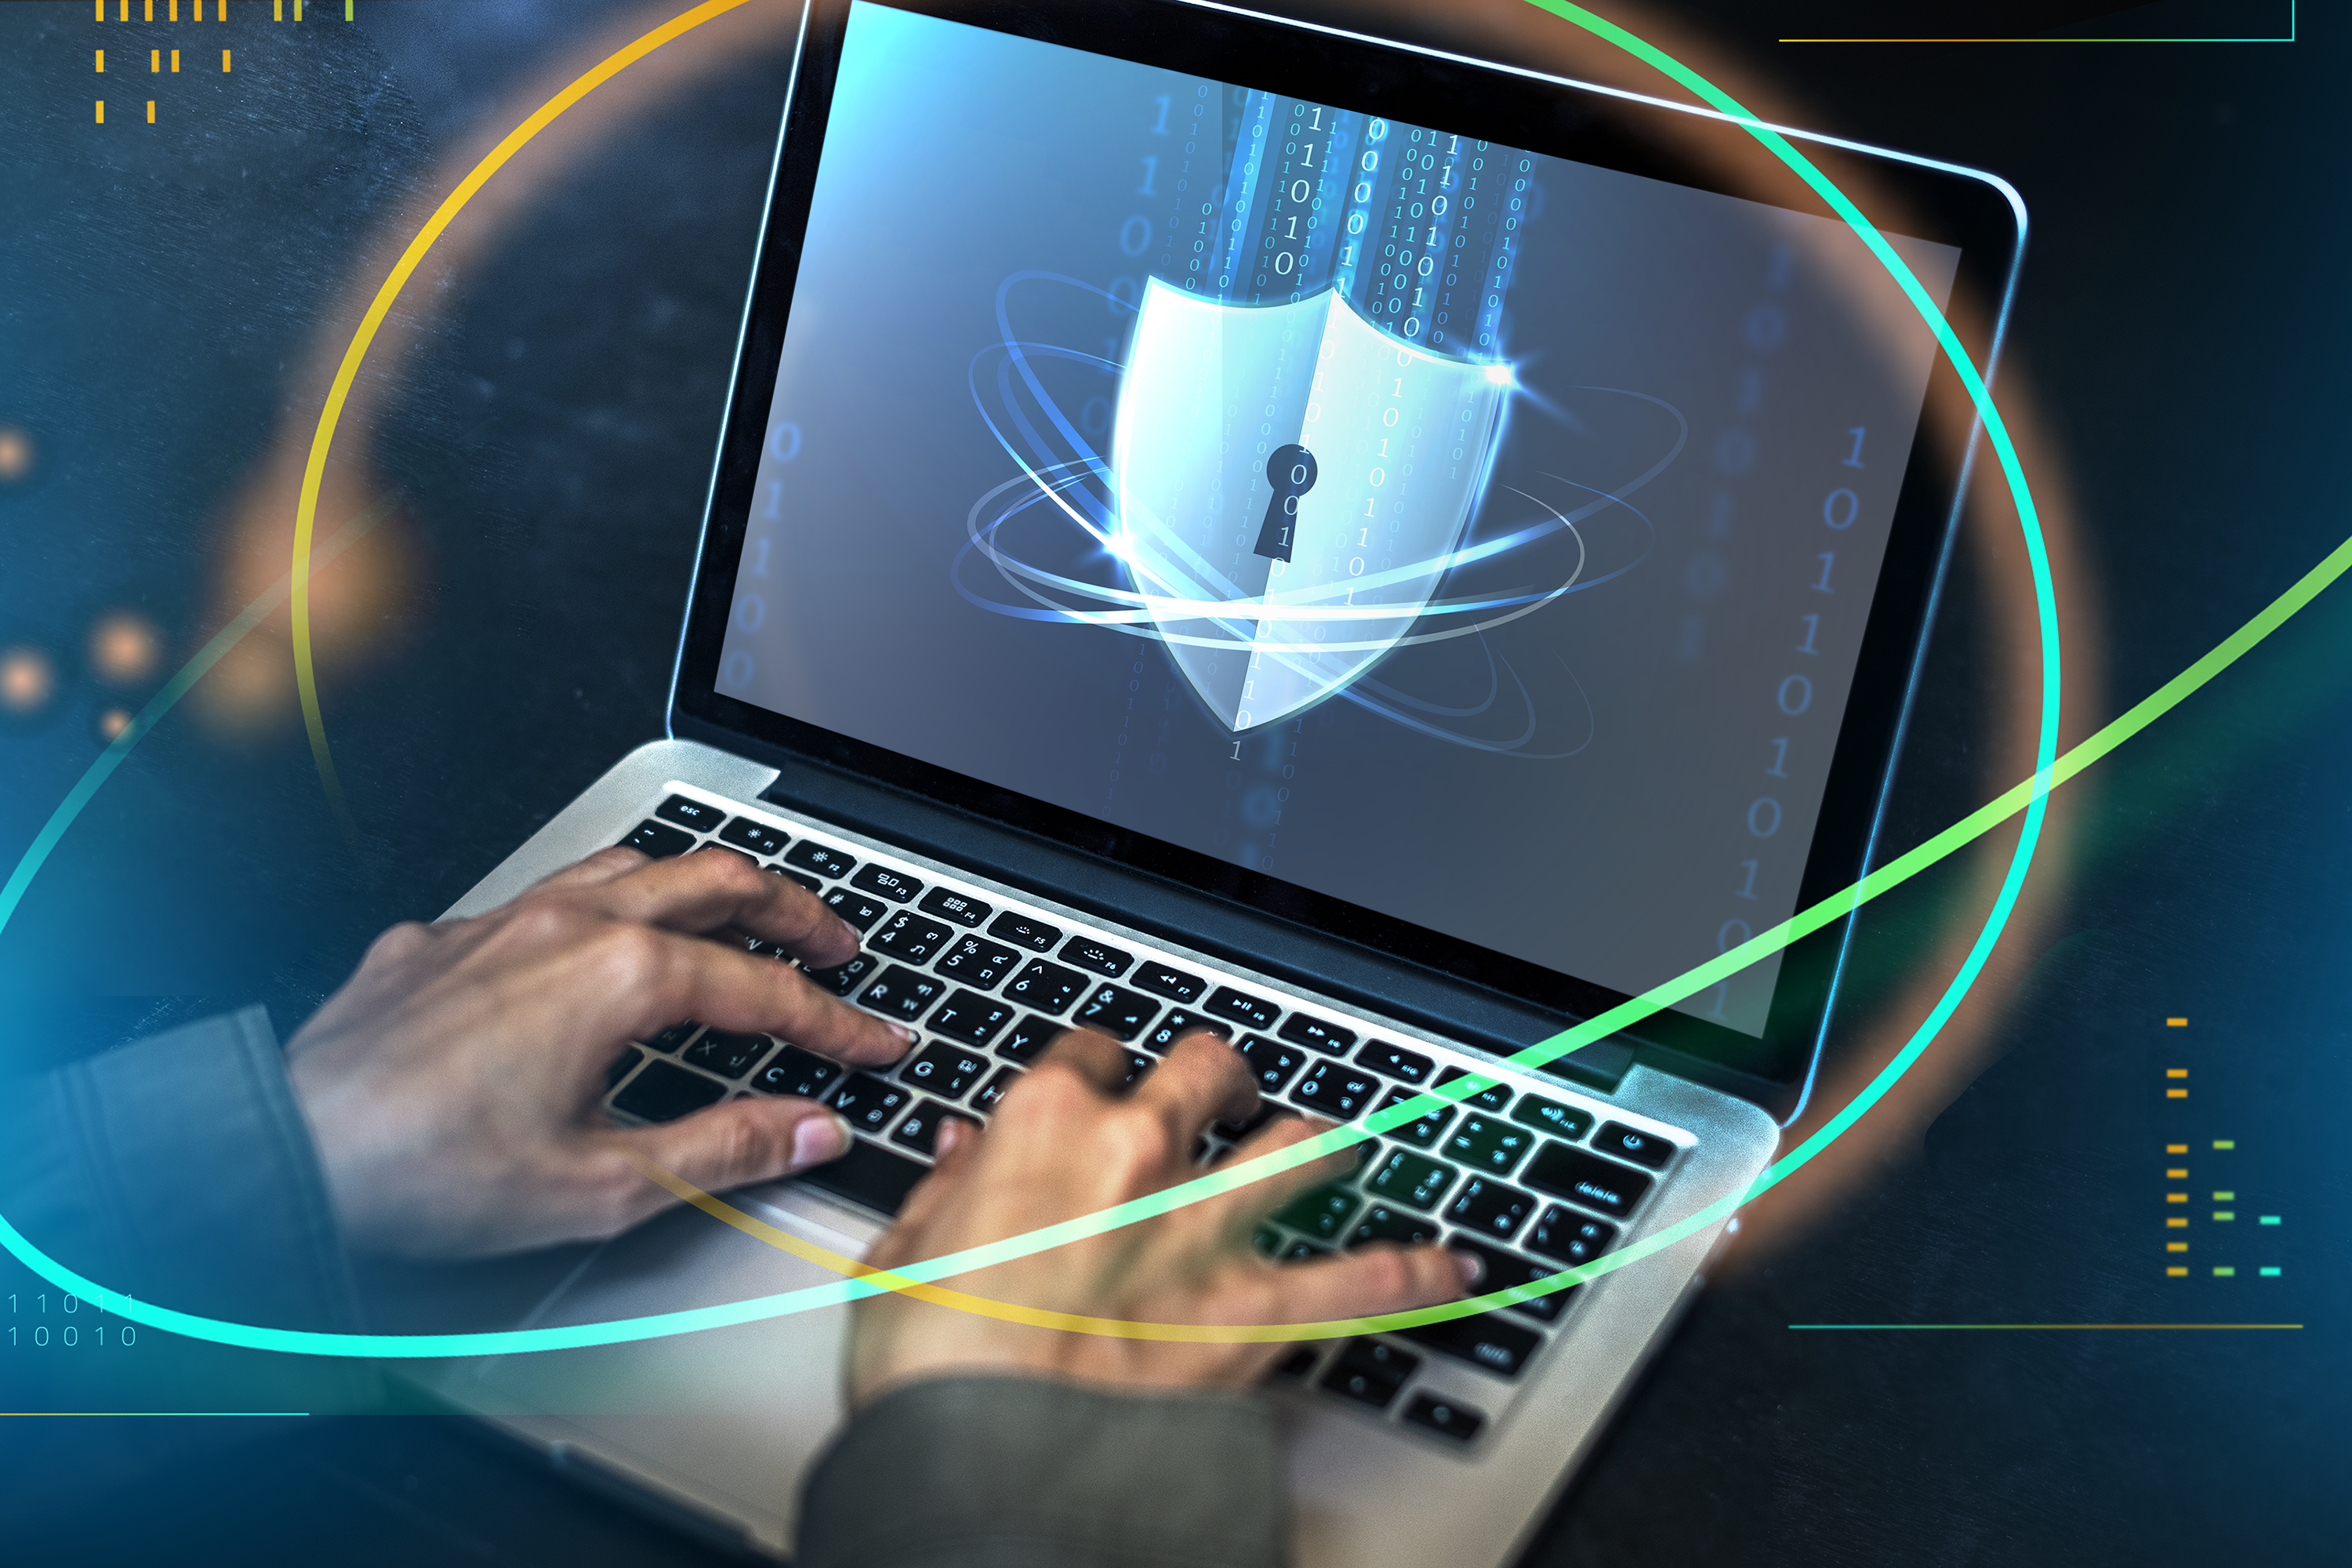 CYBER SECURITY: HOW TO PREVENT CYBER-ATTACKS WHILE WORKING FROM HOME-Image